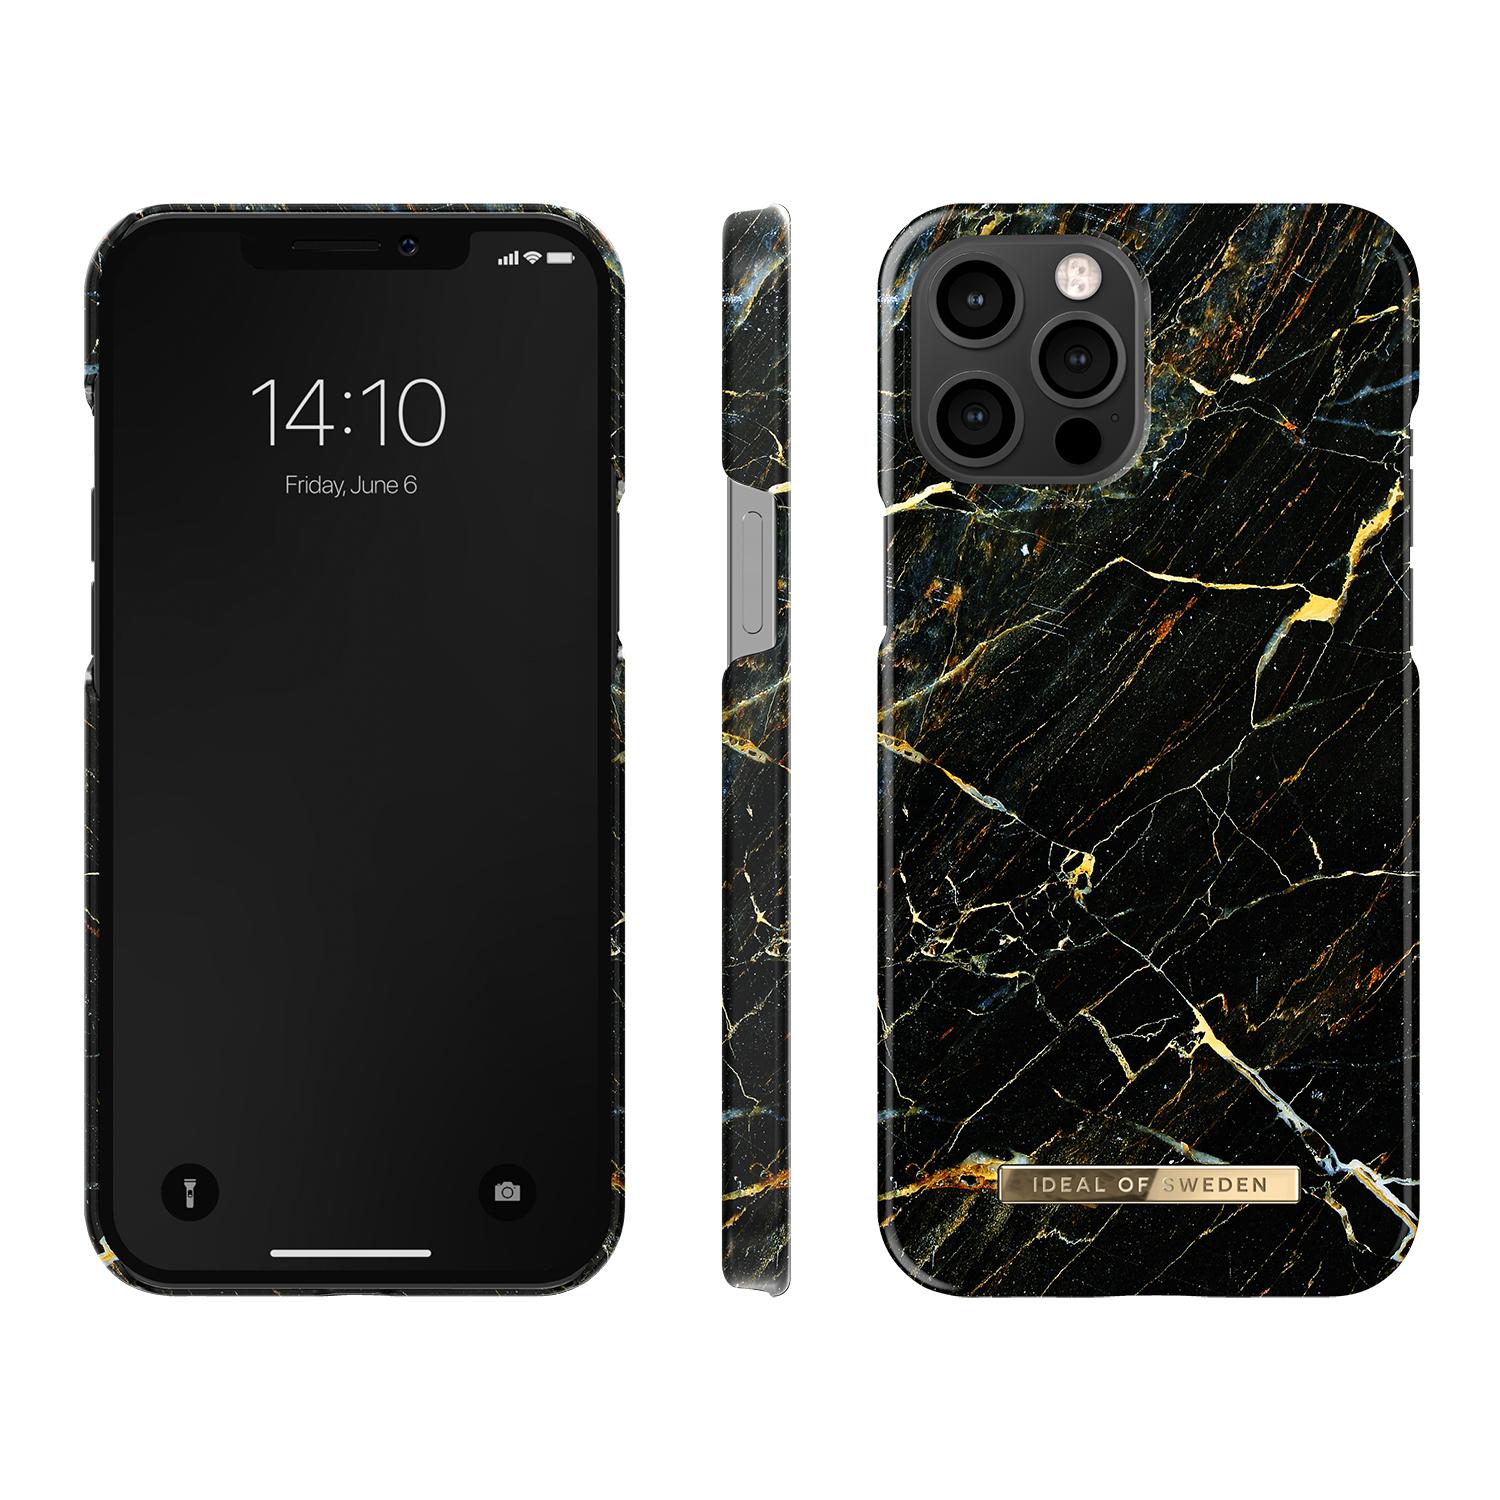 Cover Fashion Case iPhone 12 Pro Max Port Laurent Marble